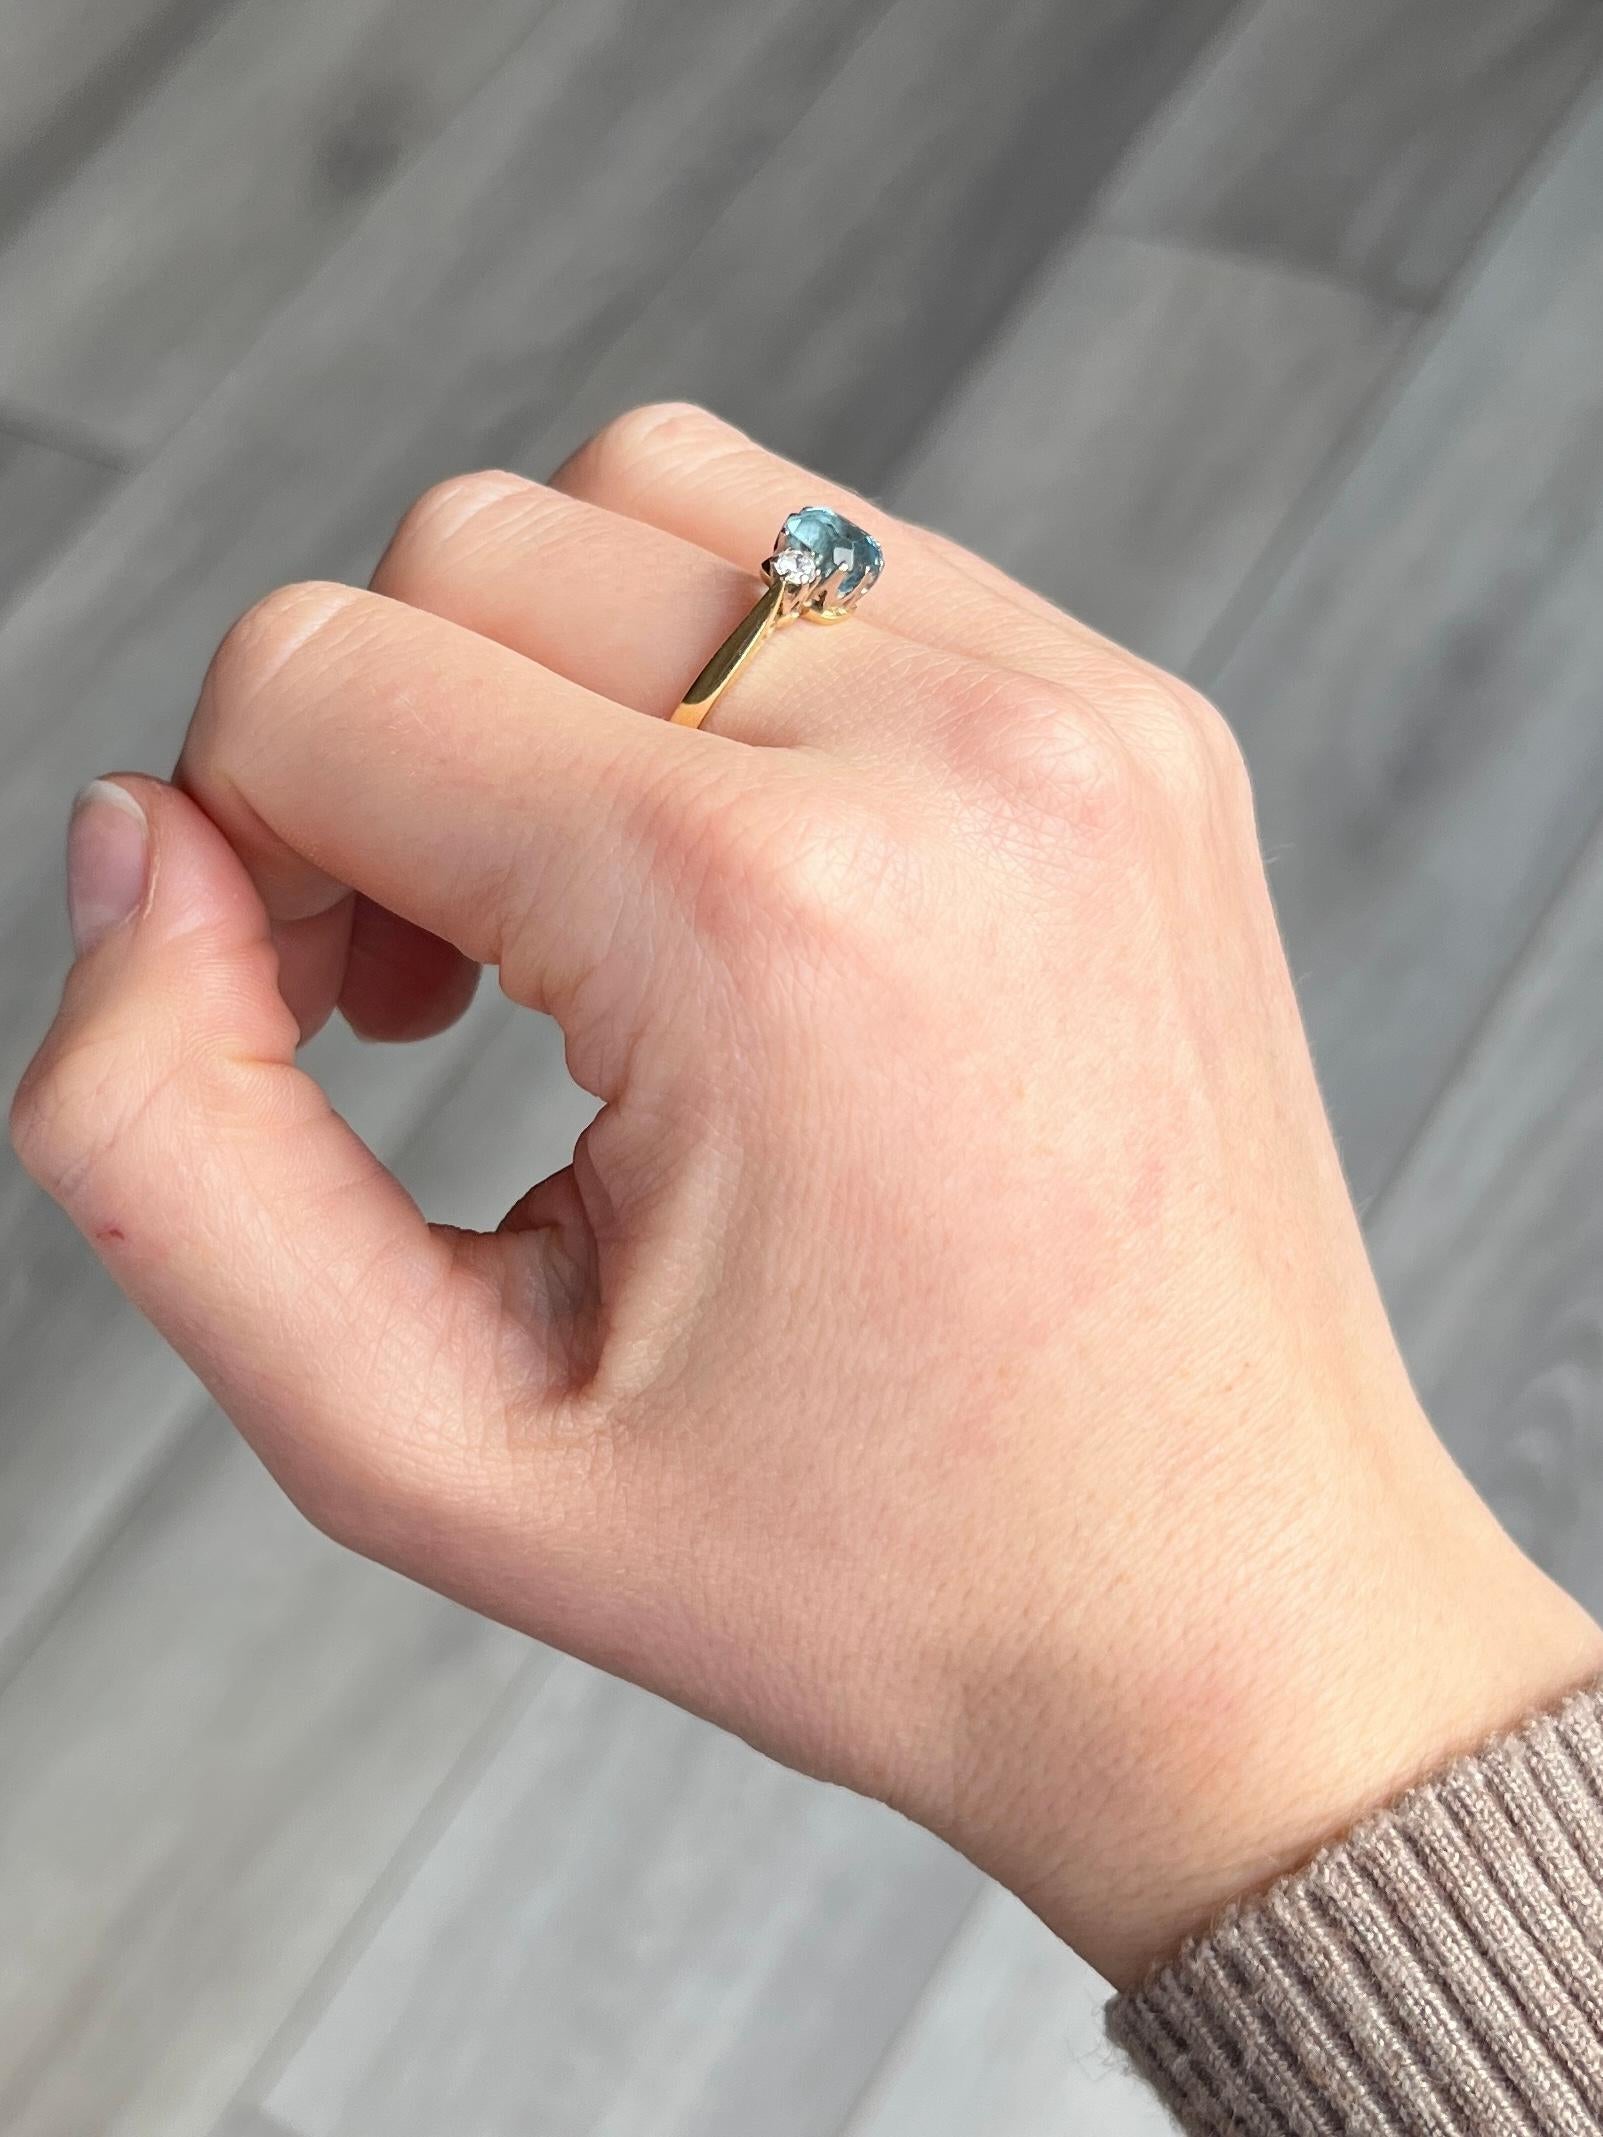 The gorgeous aqua stone in this ring is bright and has a diamond set either side. The aqua measures approx 1 carat and the diamonds measure 10pts each. The ring is modelled in 18 carat gold and the settings modelled in platinum. Stamped '18CT'.